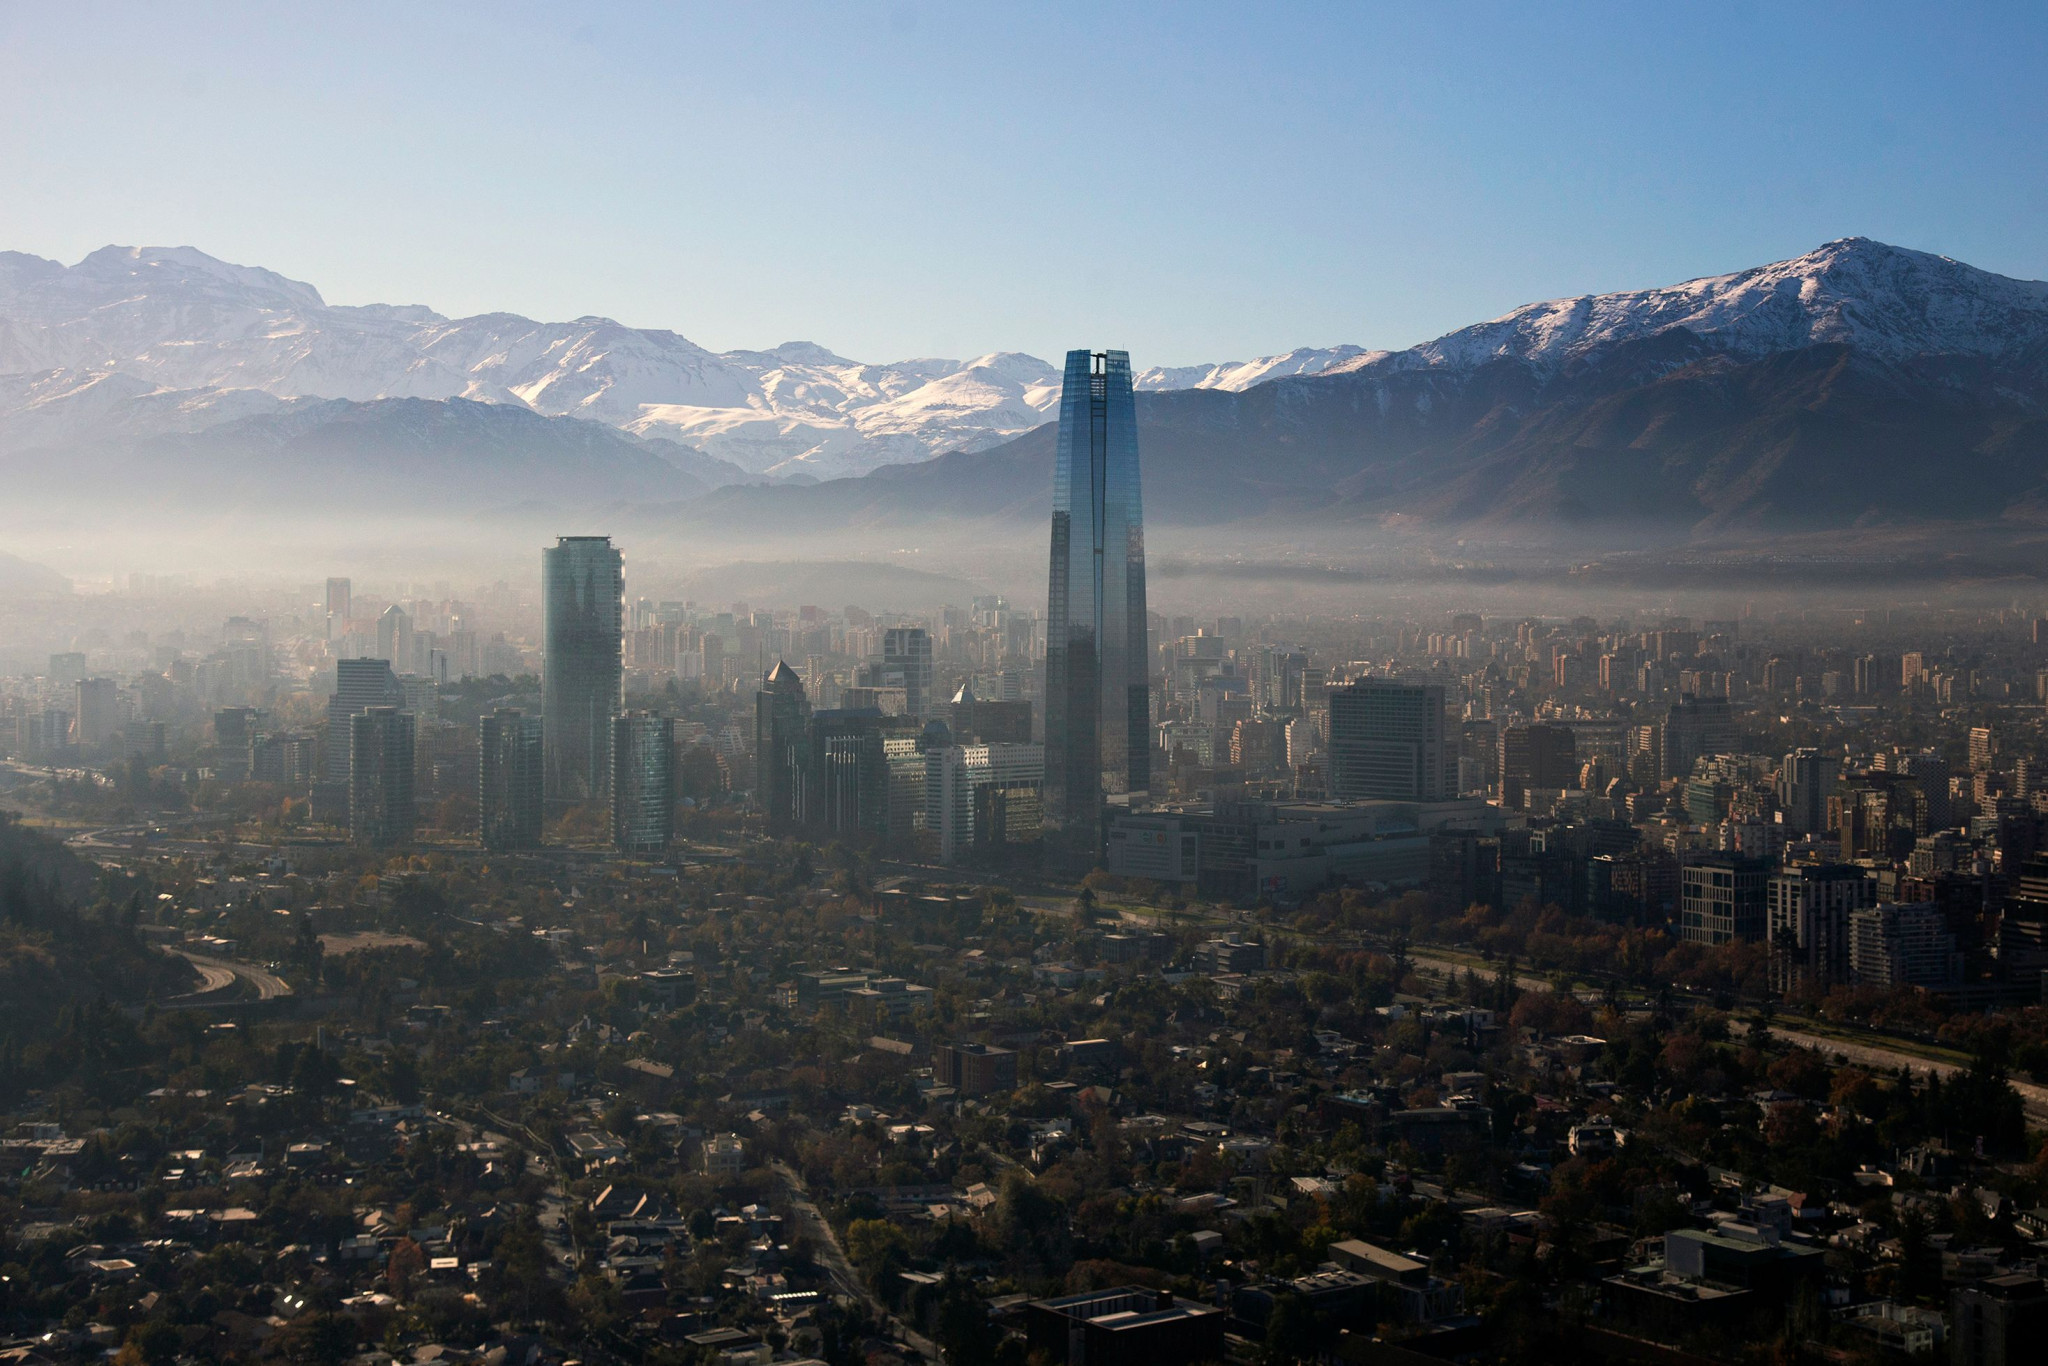 Santiago is set to host the next edition of the Pan American Games and Parapan American Games ©Getty Images